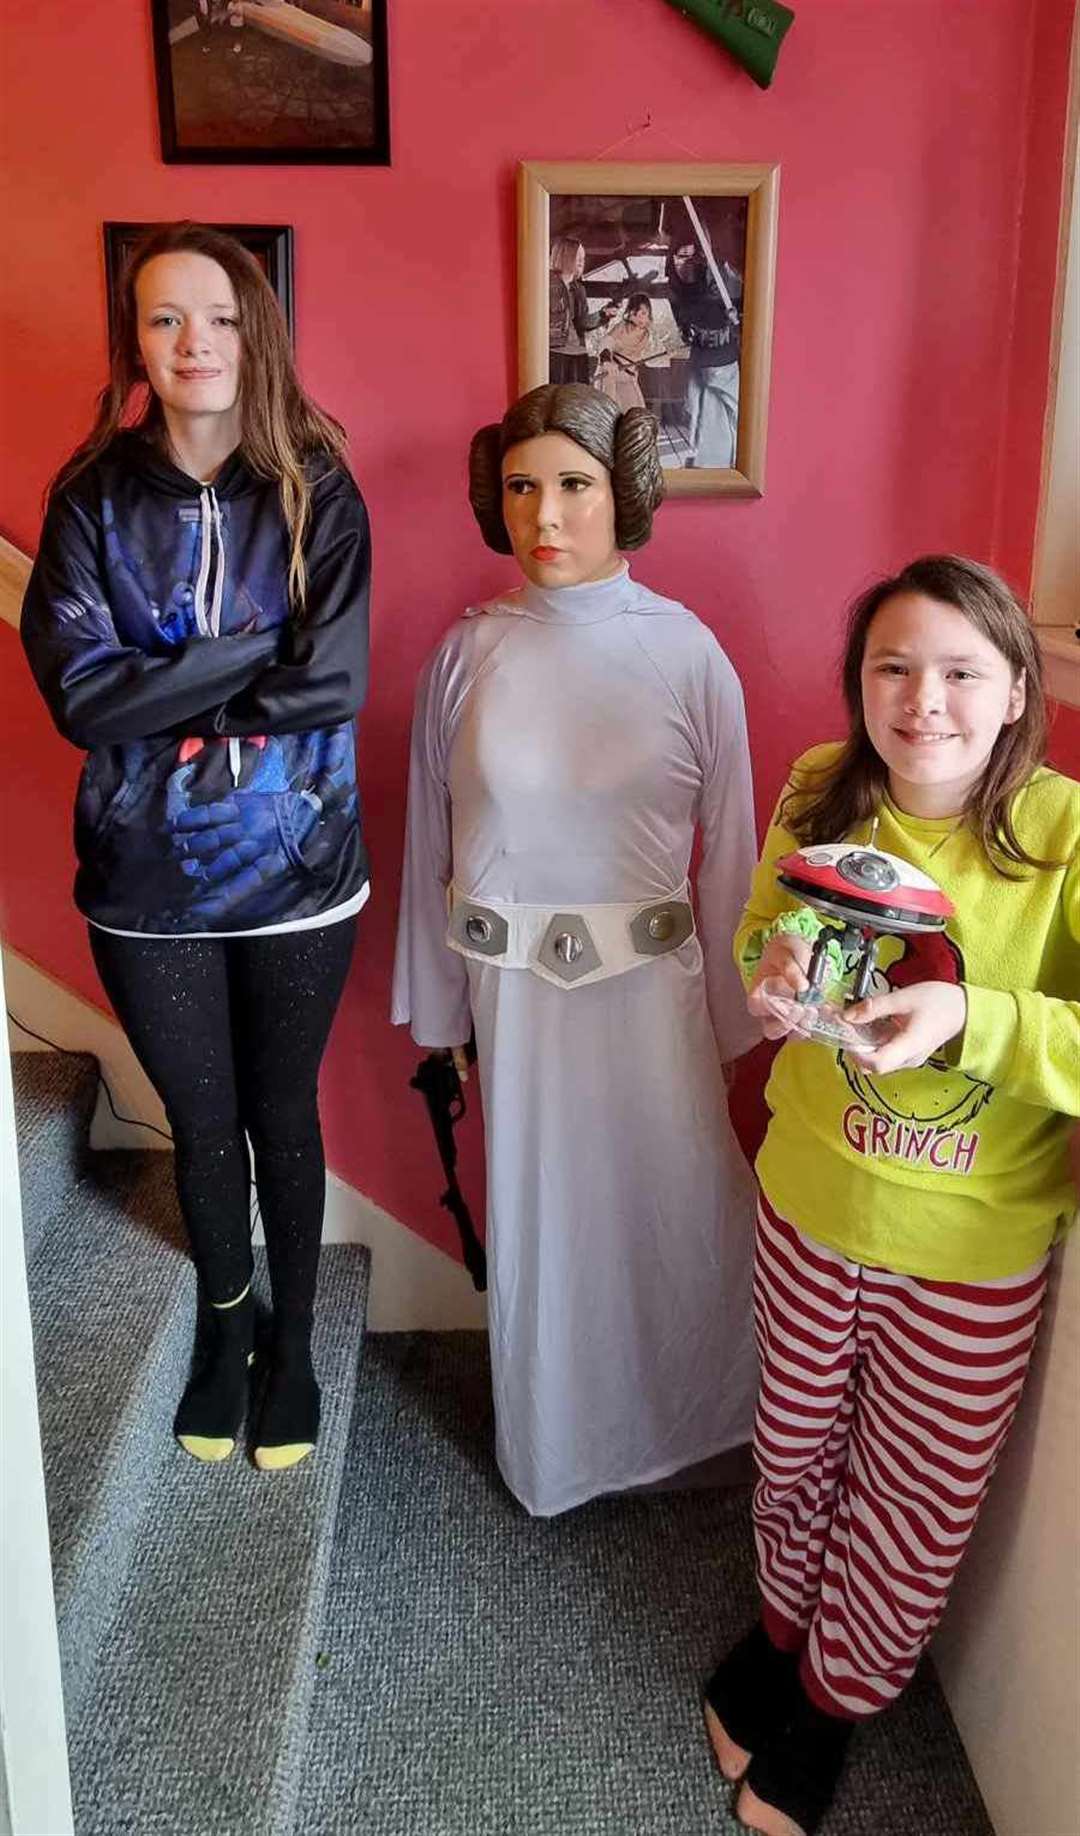 Mark's daughters Nicole and Caitlyn will be helping out dressed as Star Wars characters on May 4.